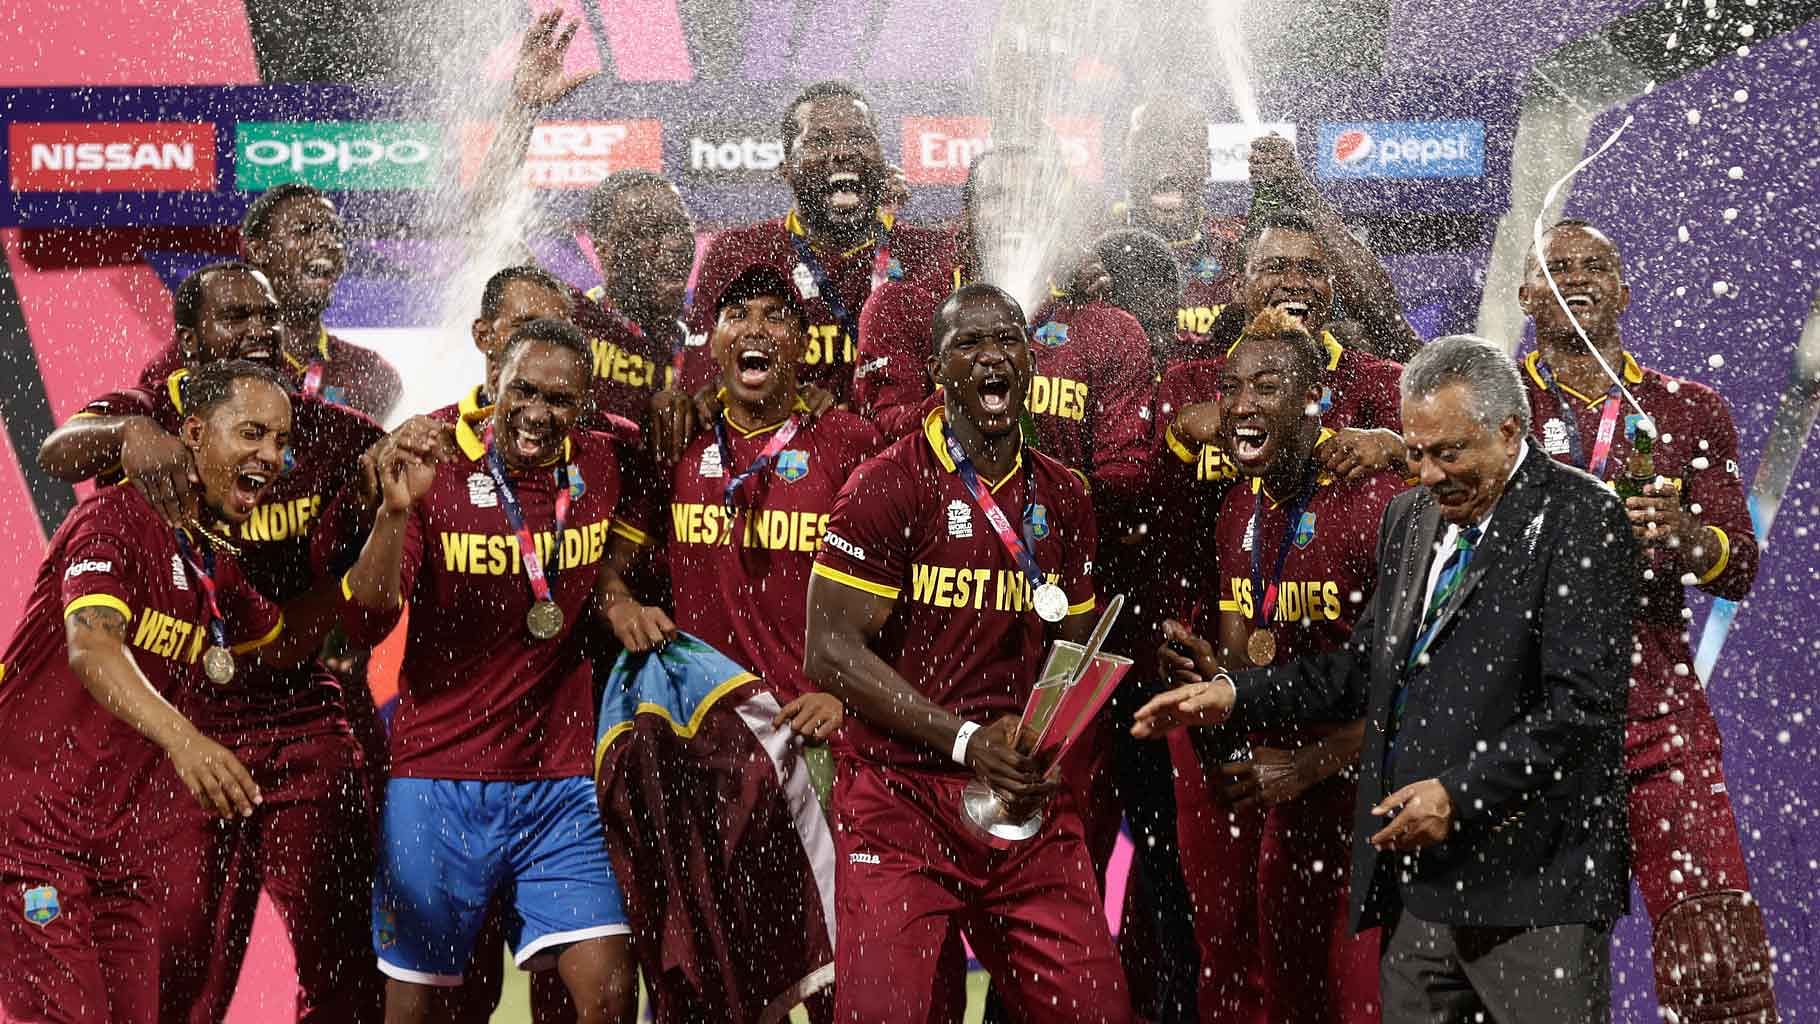 West Indies had won the T20 World Cup in India in 2016.&nbsp; &nbsp; &nbsp; &nbsp; &nbsp; &nbsp; &nbsp; &nbsp; &nbsp; &nbsp; &nbsp; &nbsp; &nbsp; &nbsp; &nbsp; &nbsp; &nbsp; &nbsp; &nbsp; &nbsp; &nbsp; &nbsp; &nbsp; &nbsp; &nbsp; &nbsp;